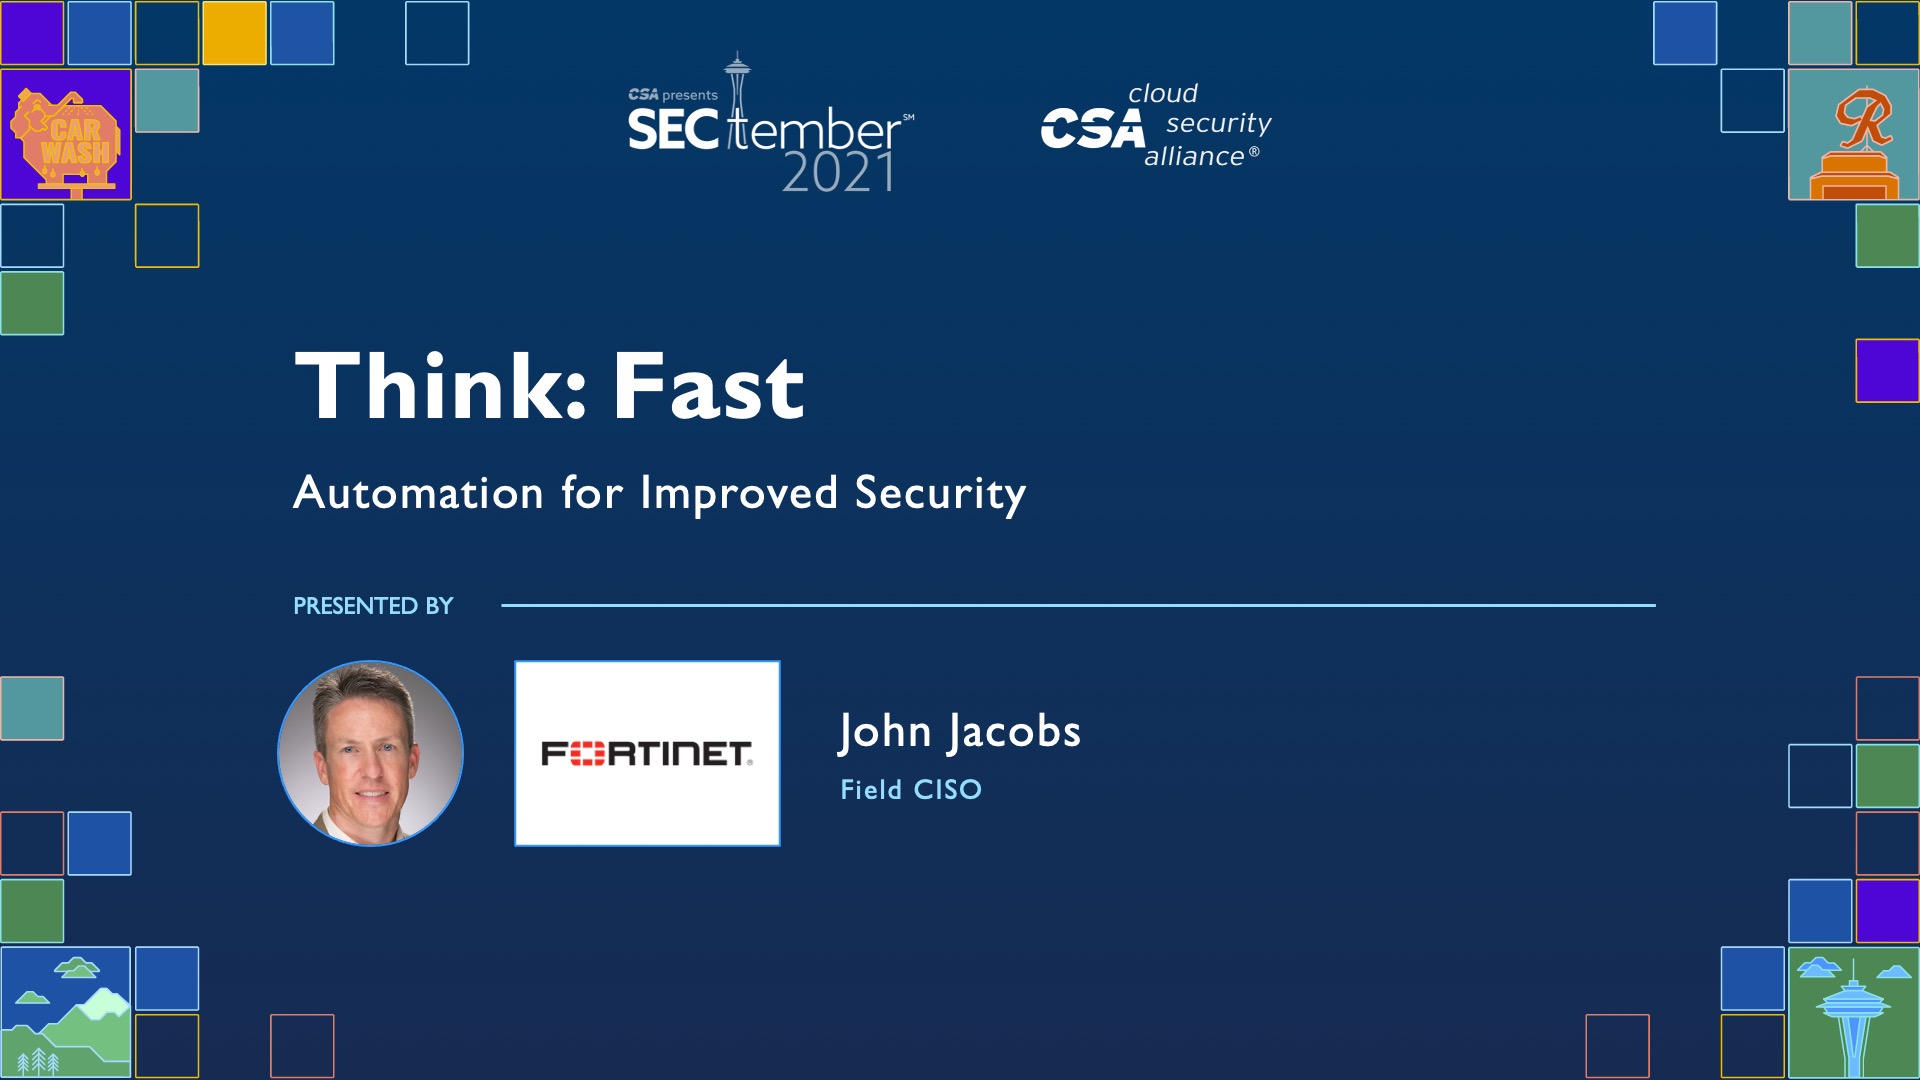 Think Fast! - Machine Learning for Improved Security